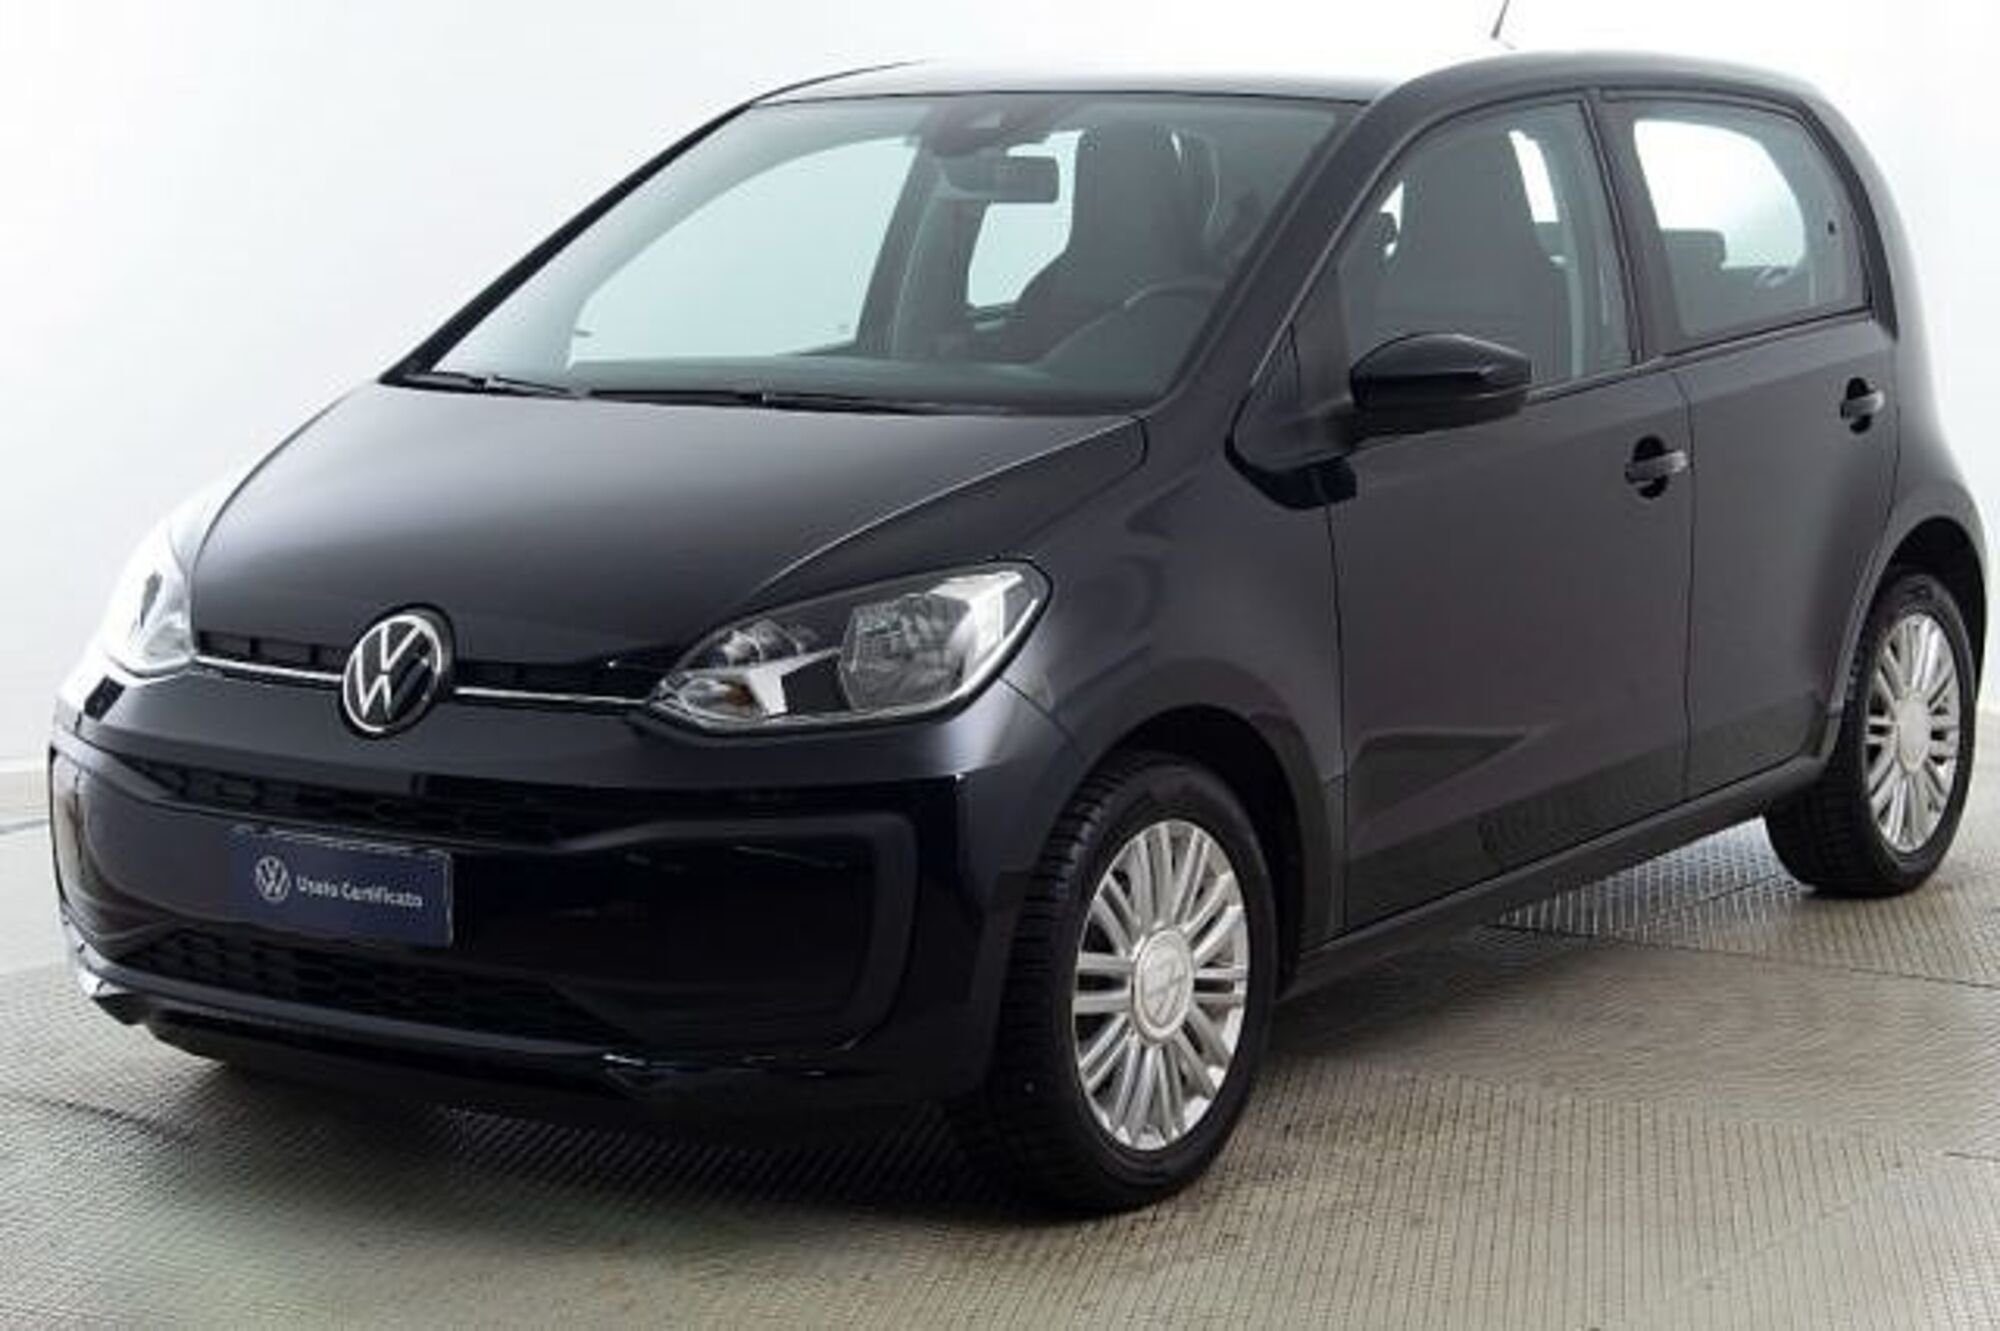 Volkswagen up! 5p. move up! BlueMotion Technology 